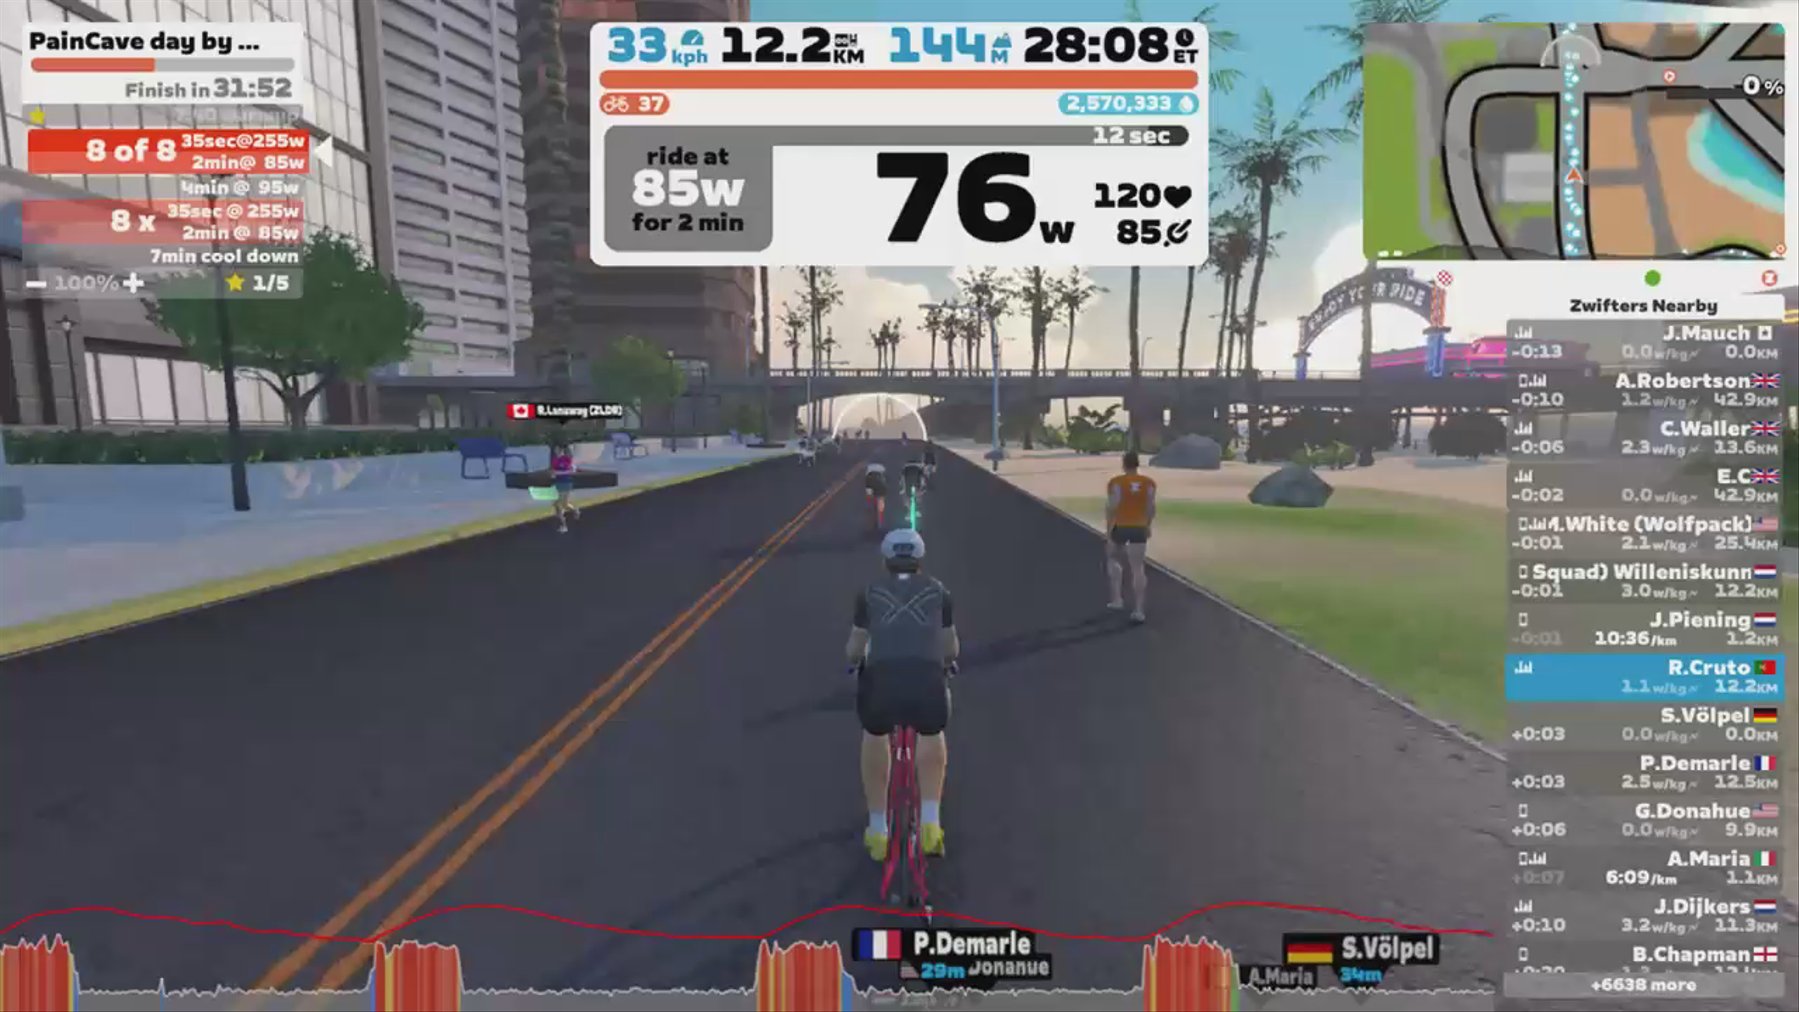 Zwift - PainCave day by CTAD in Watopia